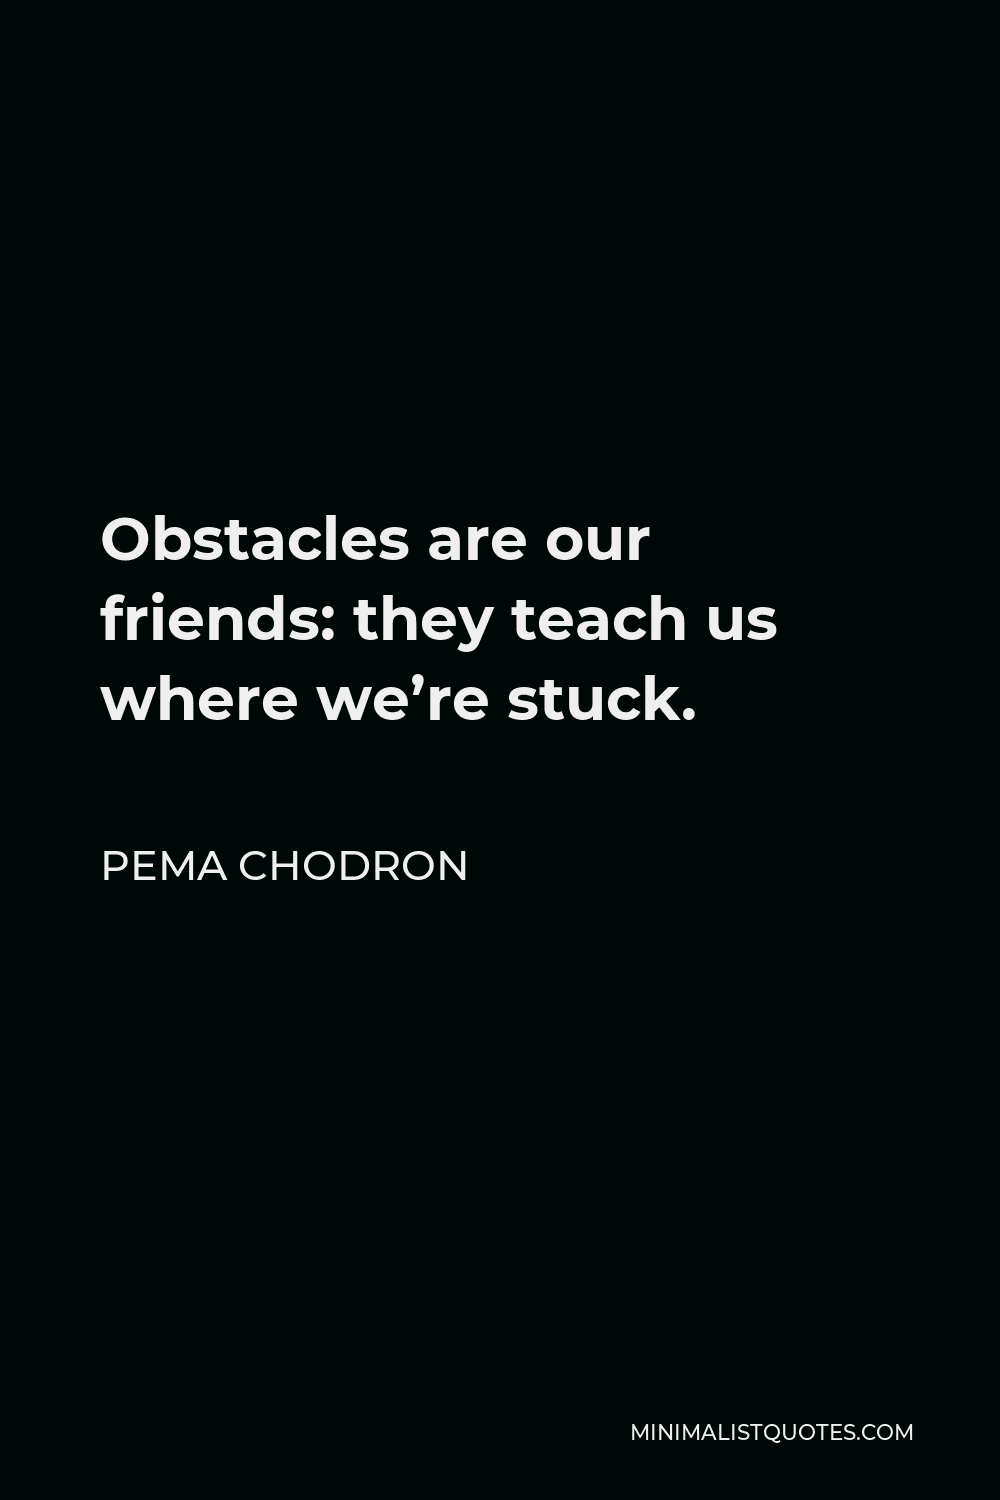 Pema Chodron Quote - Obstacles are our friends: they teach us where we’re stuck.